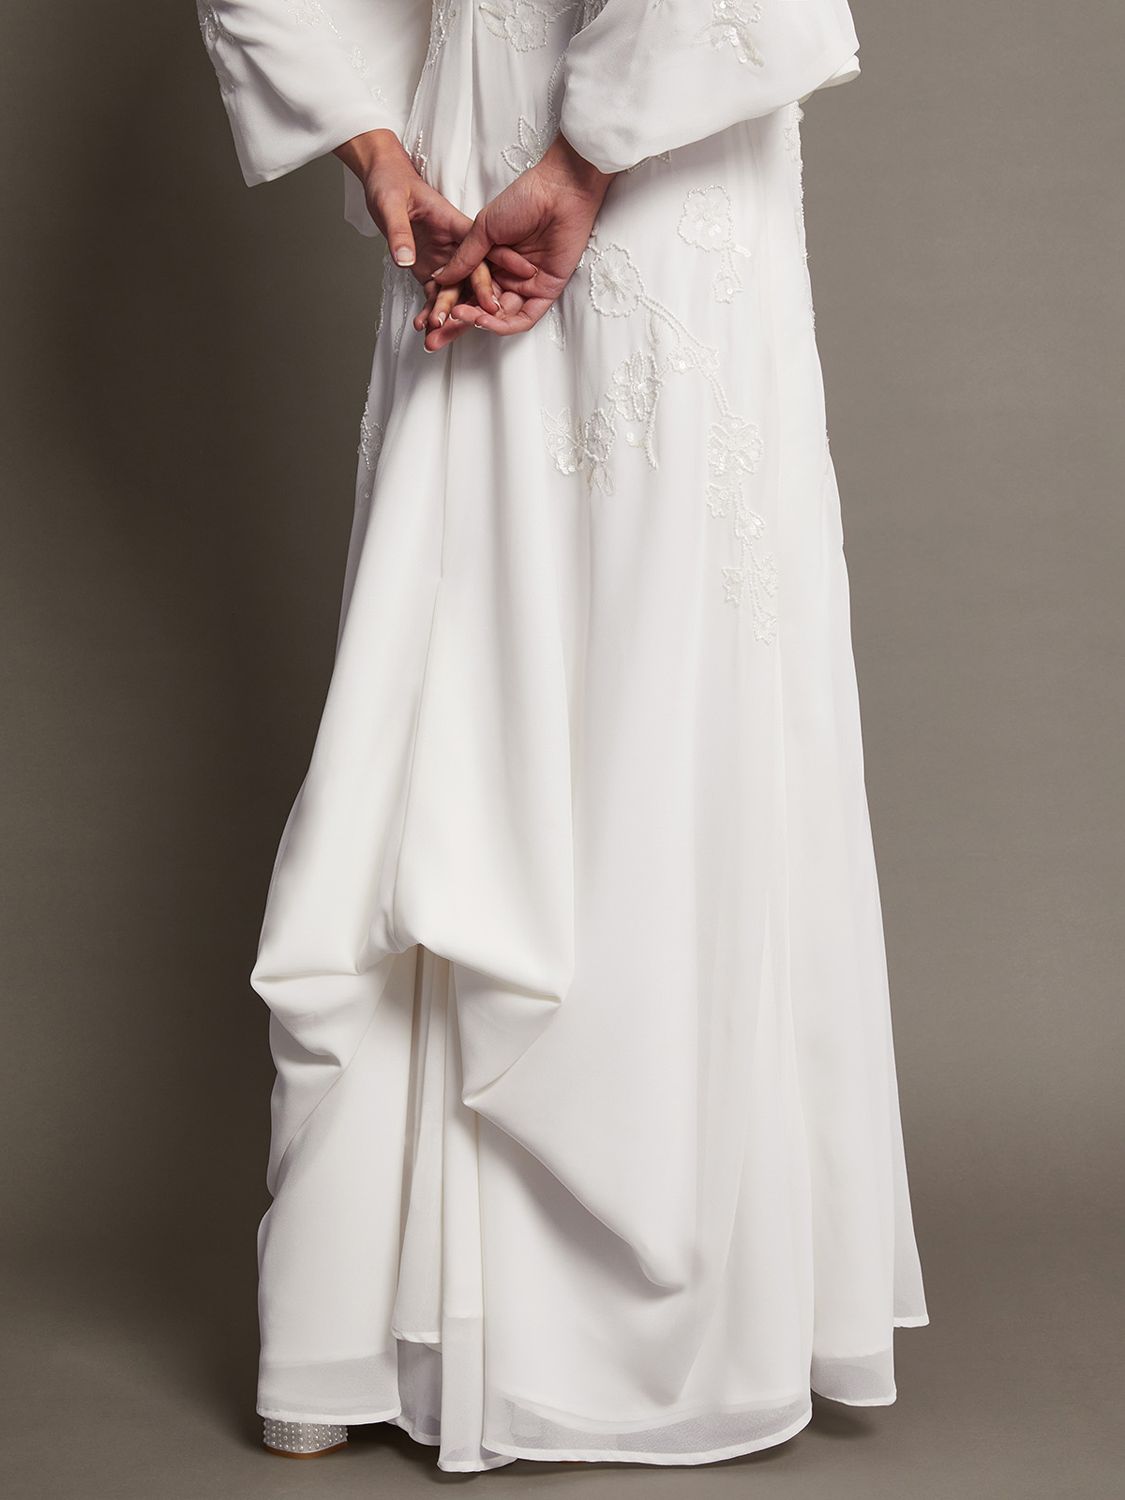 Buy Monsoon Camilla Embroided Wedding Dress, Ivory Online at johnlewis.com